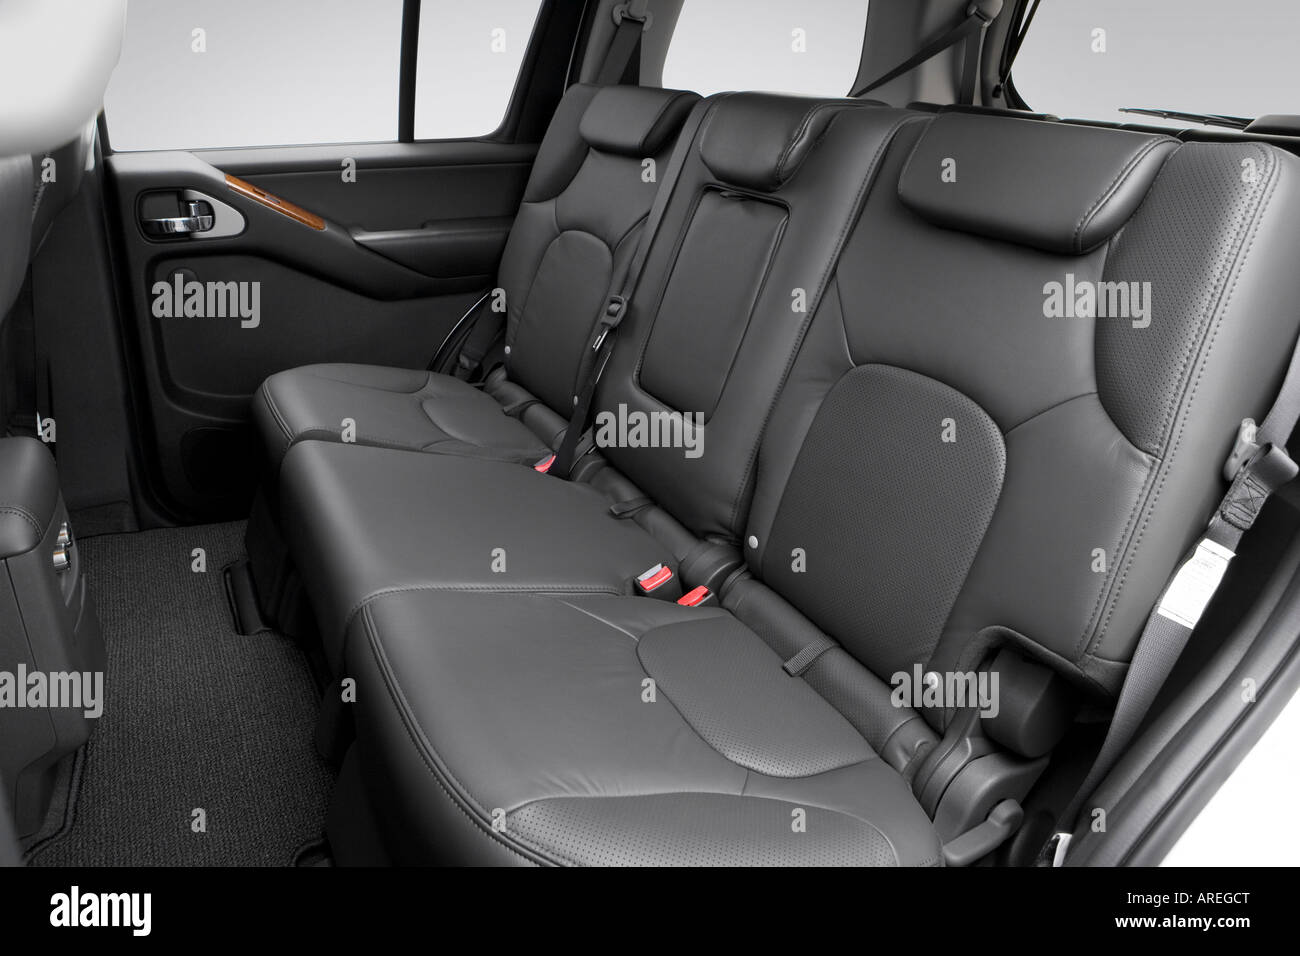 2006 Nissan Pathfinder LE in Silver - Rear seats Stock Photo